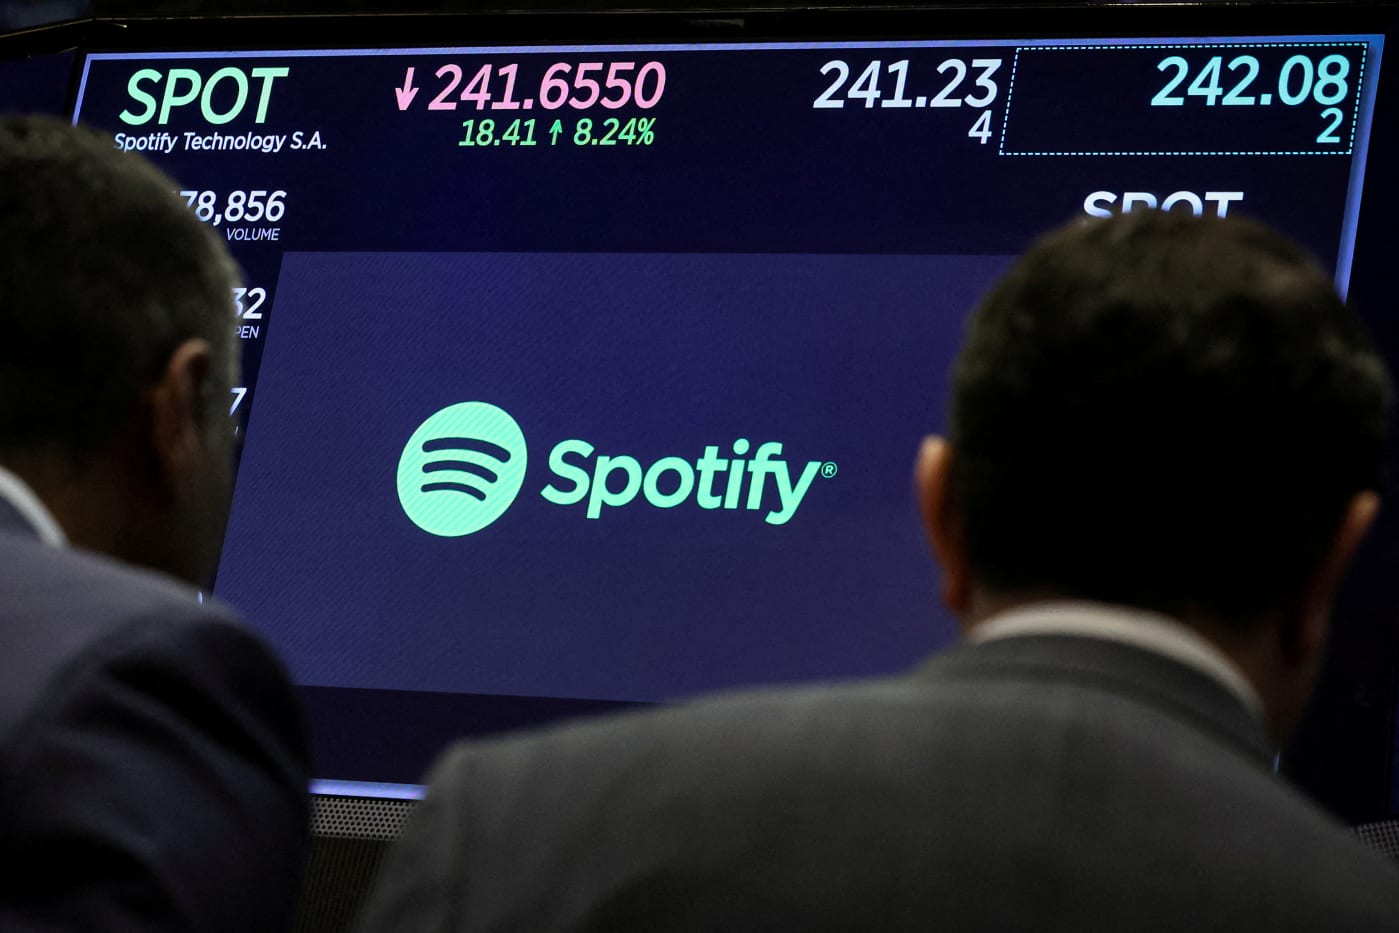 Some Spotify plans are reportedly getting more expensive soon